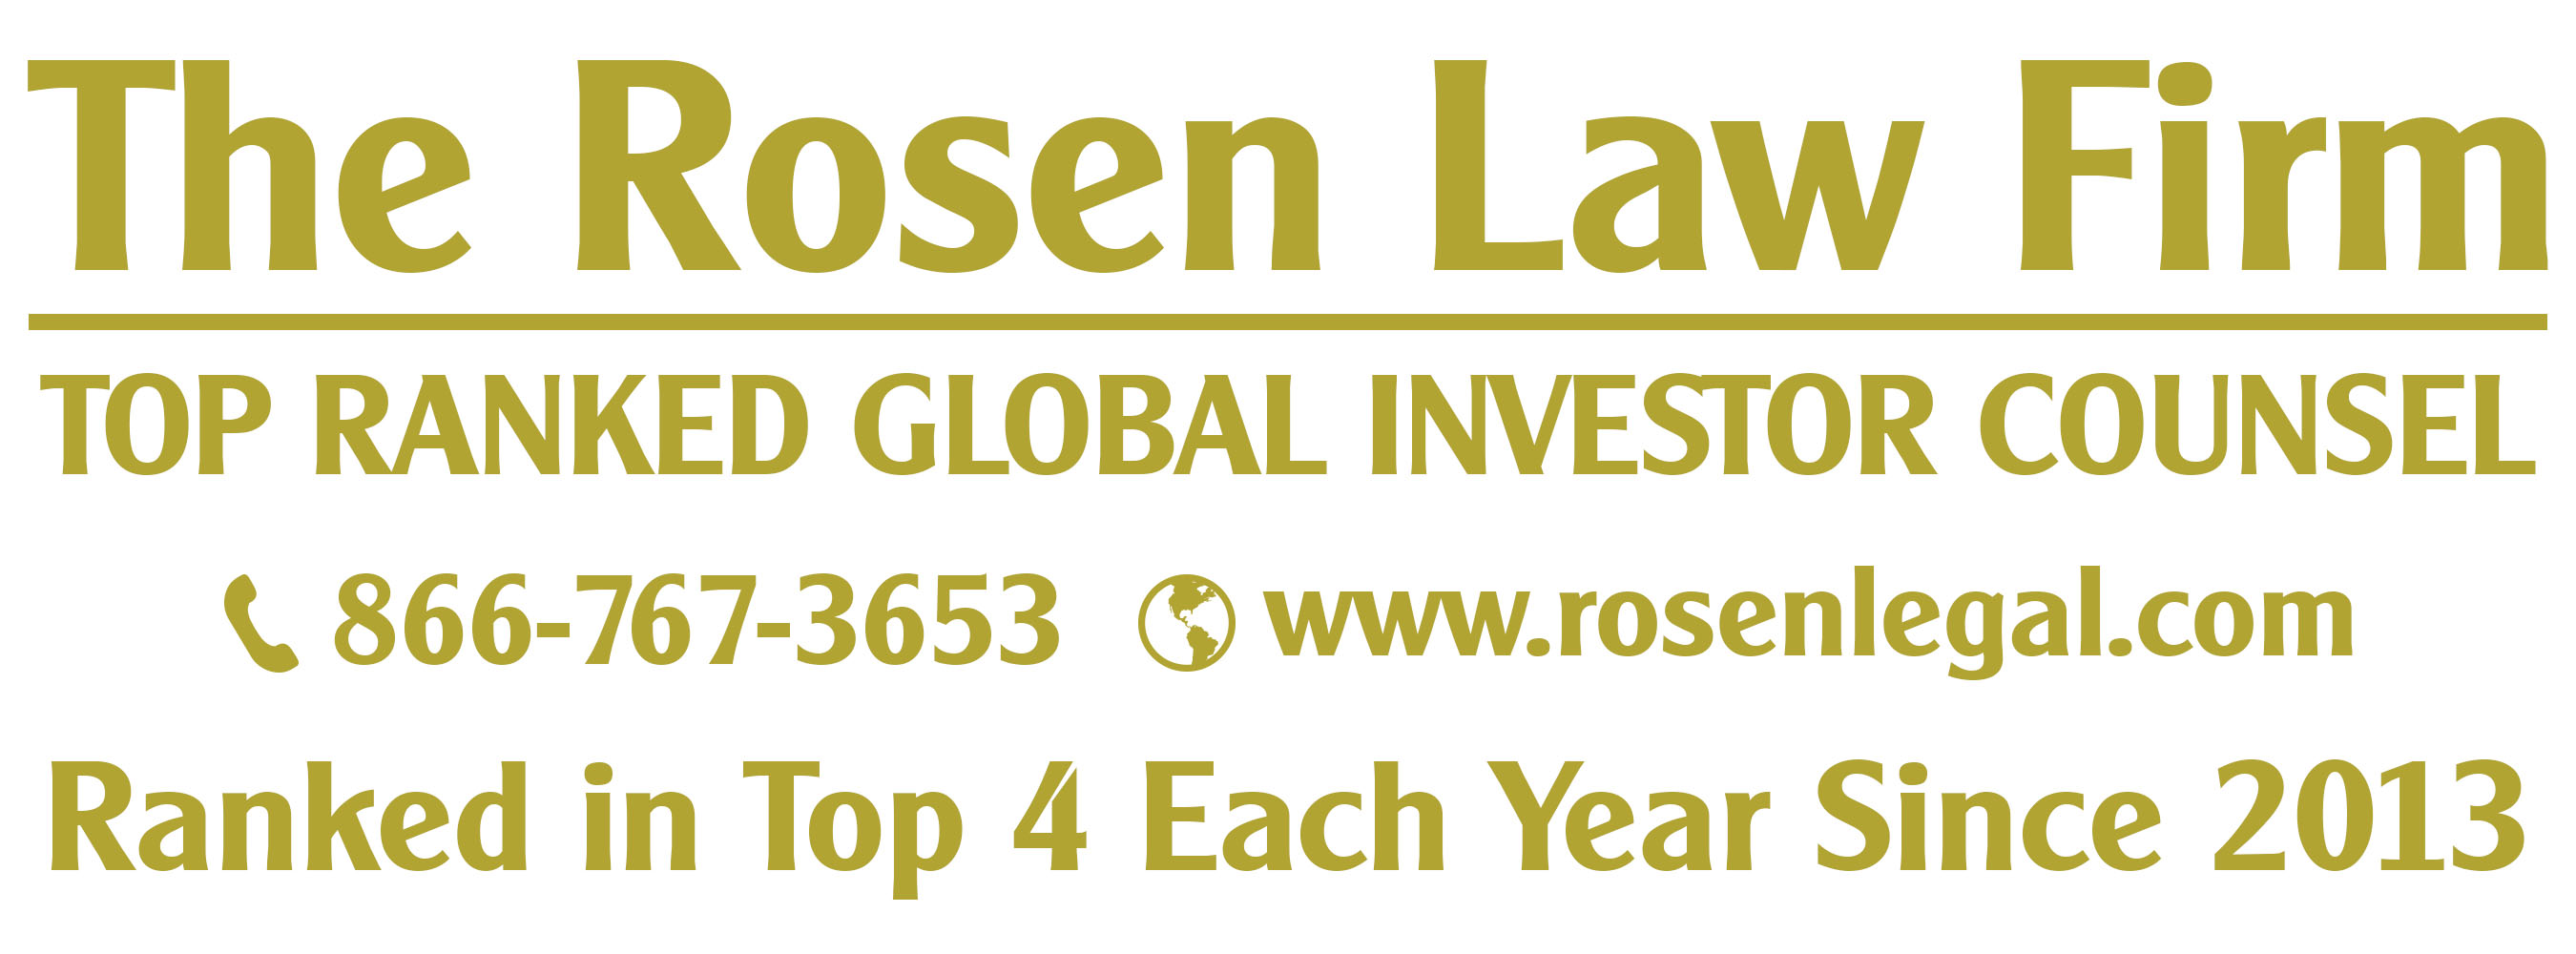 Rosen Law Firm PA, Wednesday, January 11, 2023, Press release picture